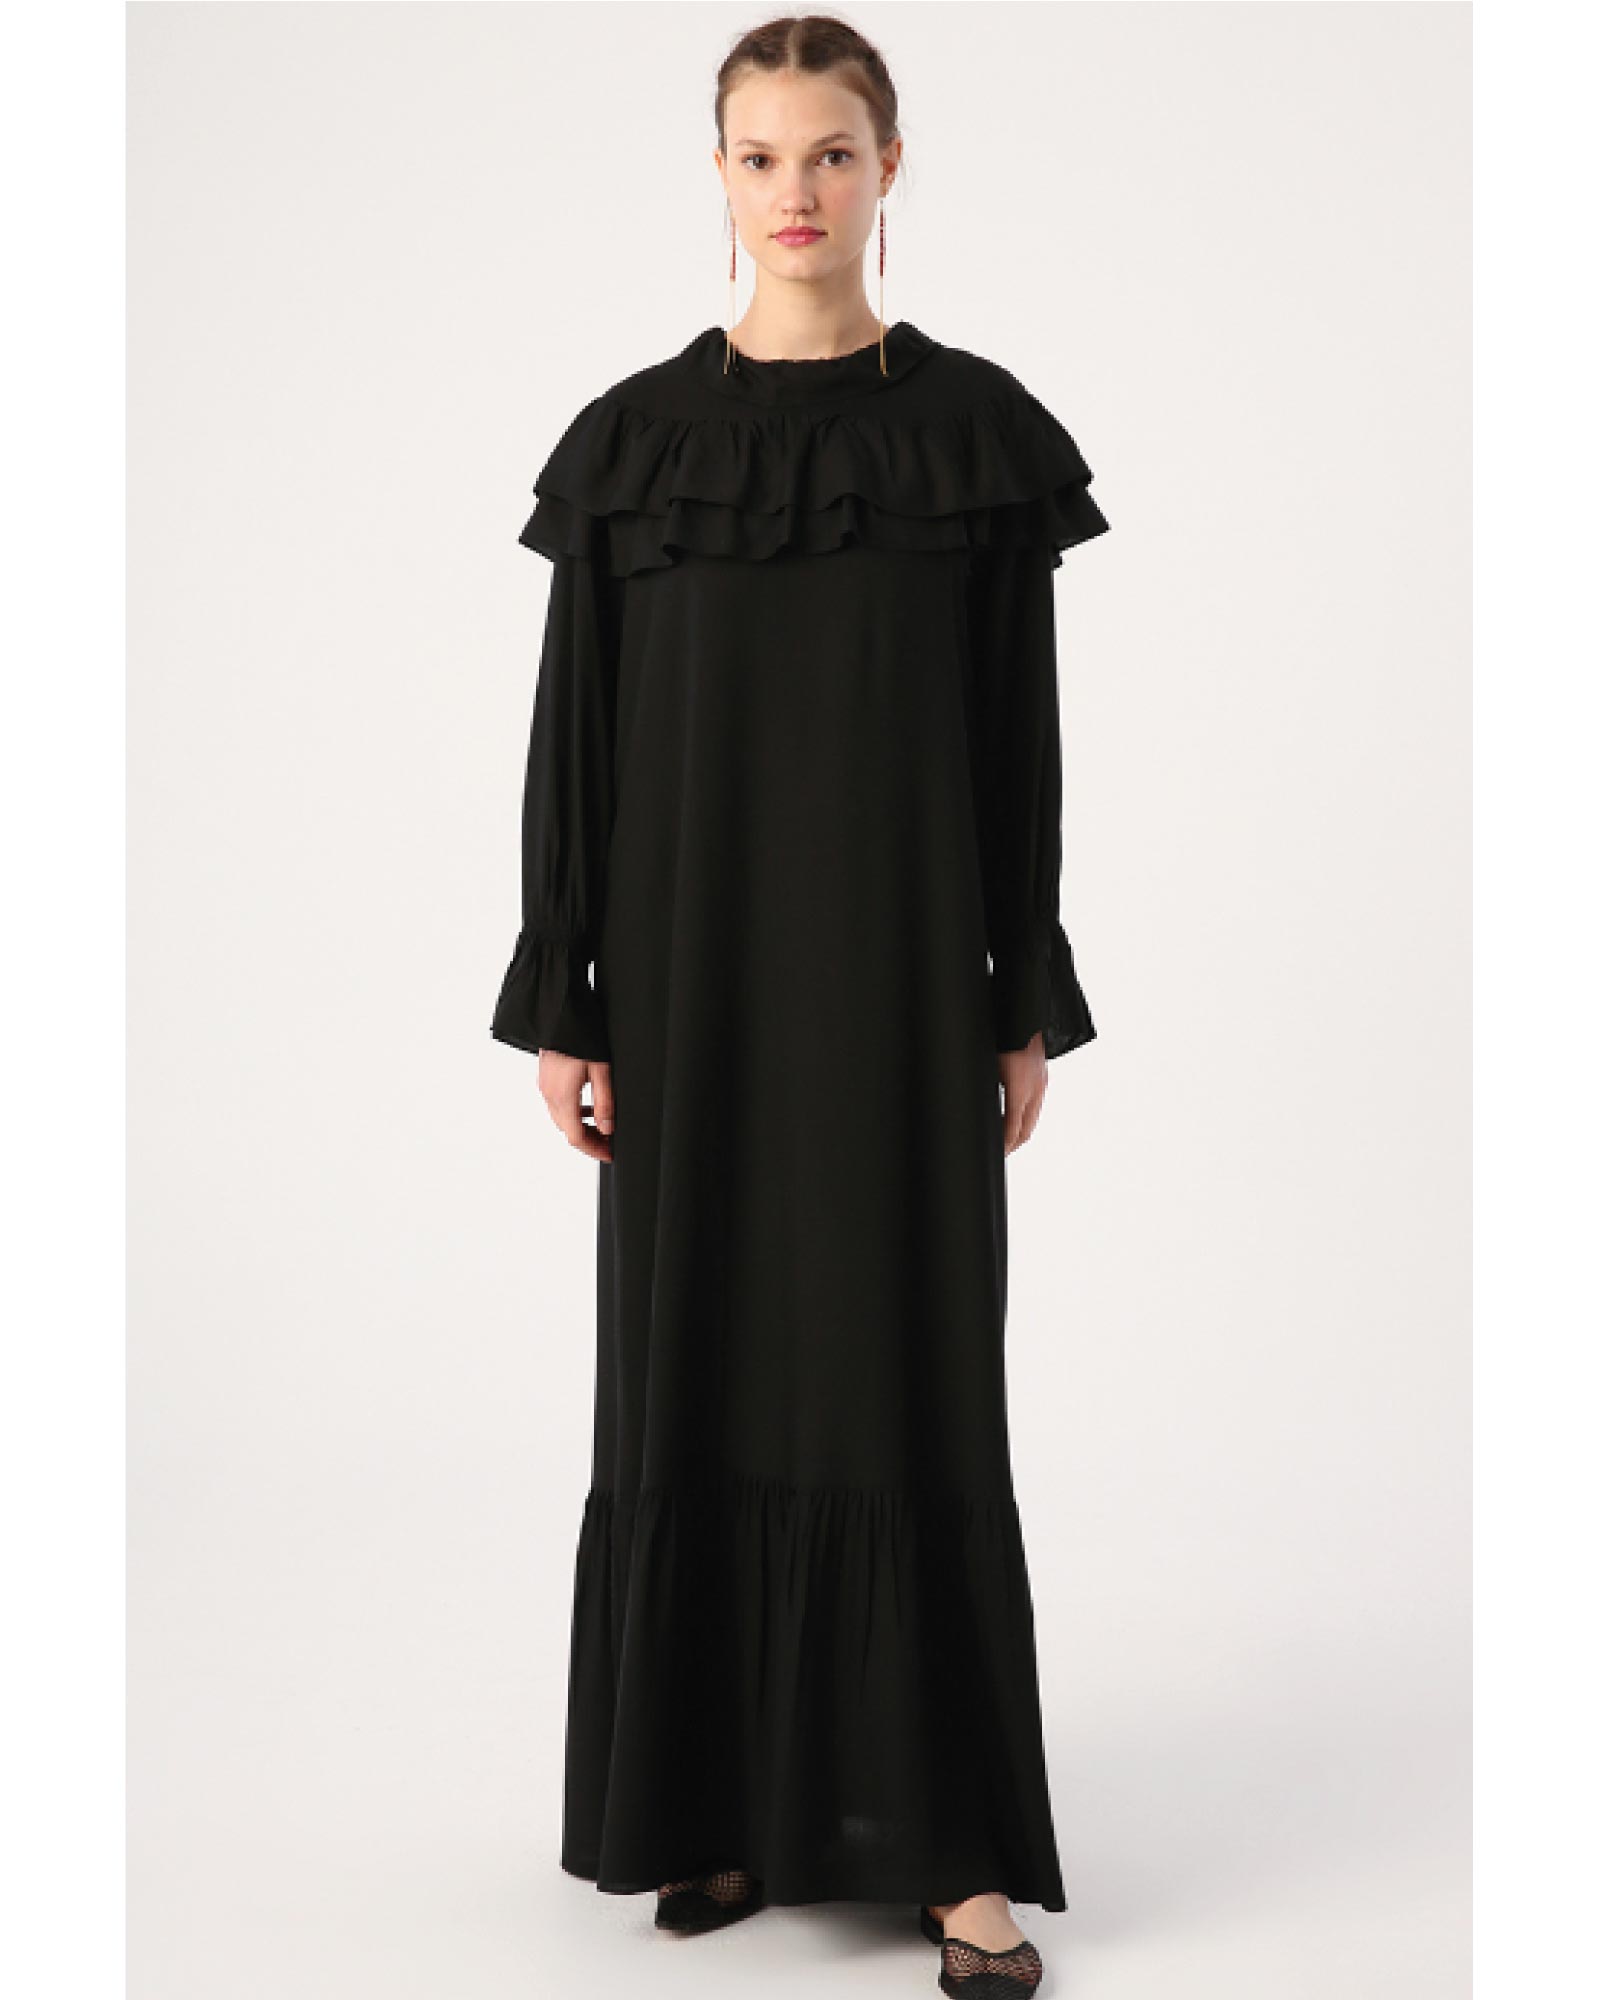 Hijab dress with ruffles on the shoulders and sleeves